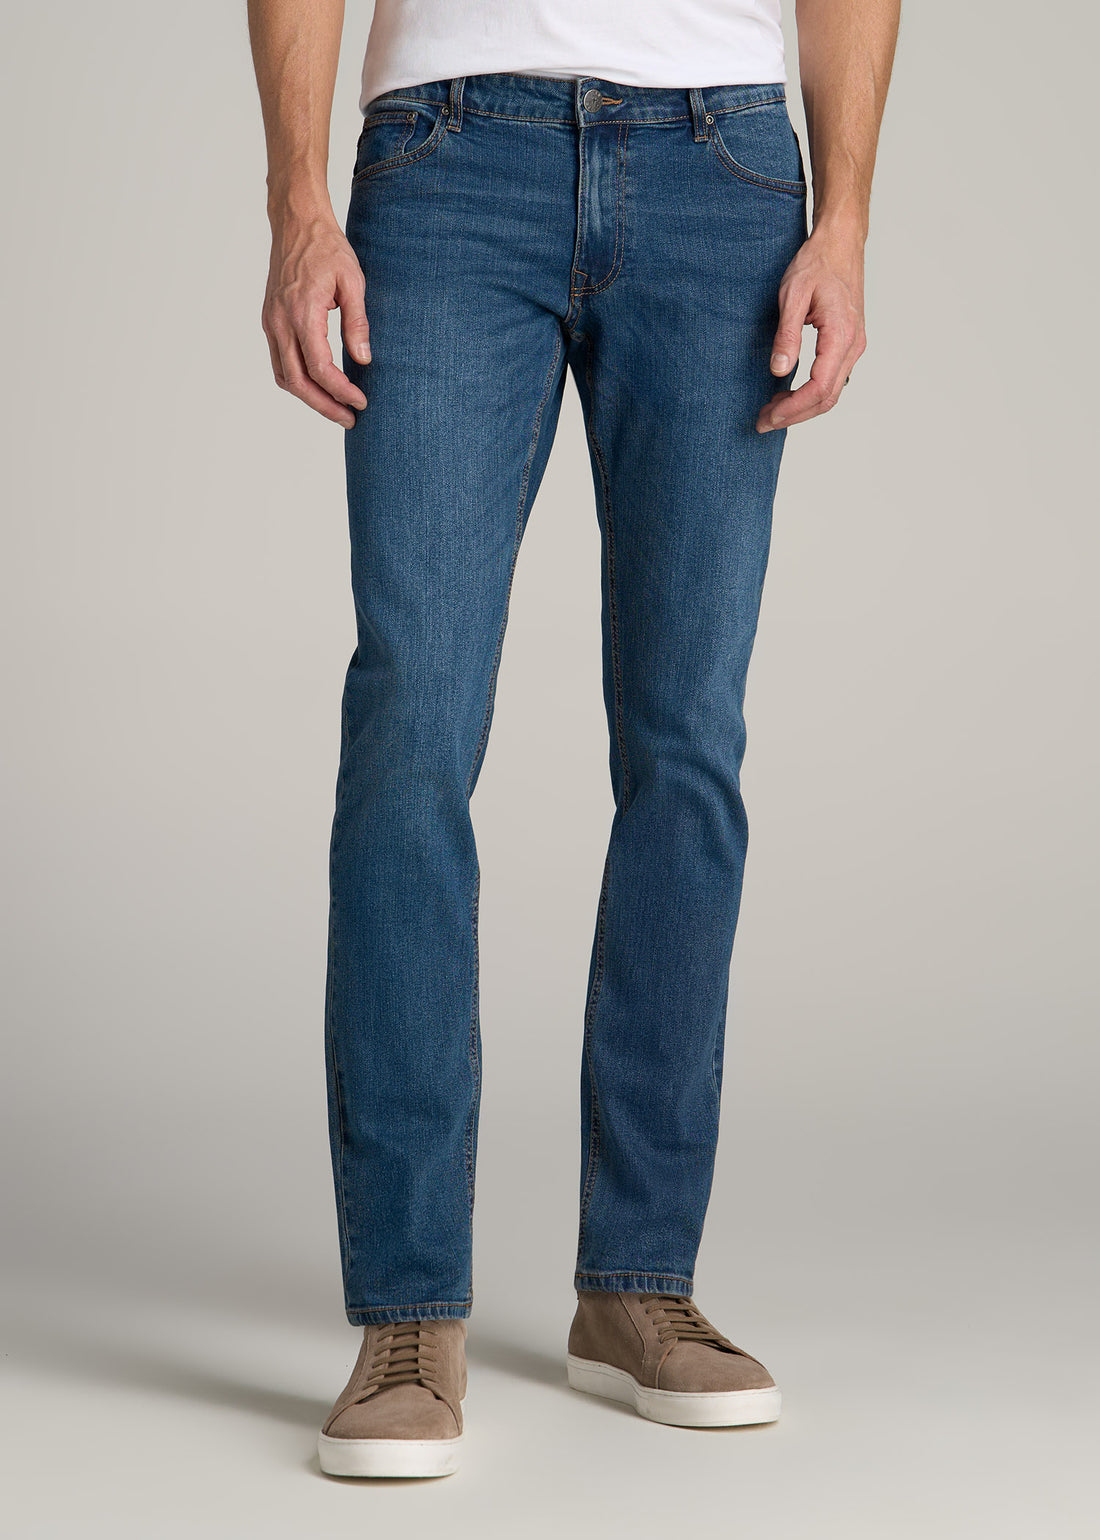 Tall man wearing American Tall's Carman Tapered Jeans in the color Worn Blue.